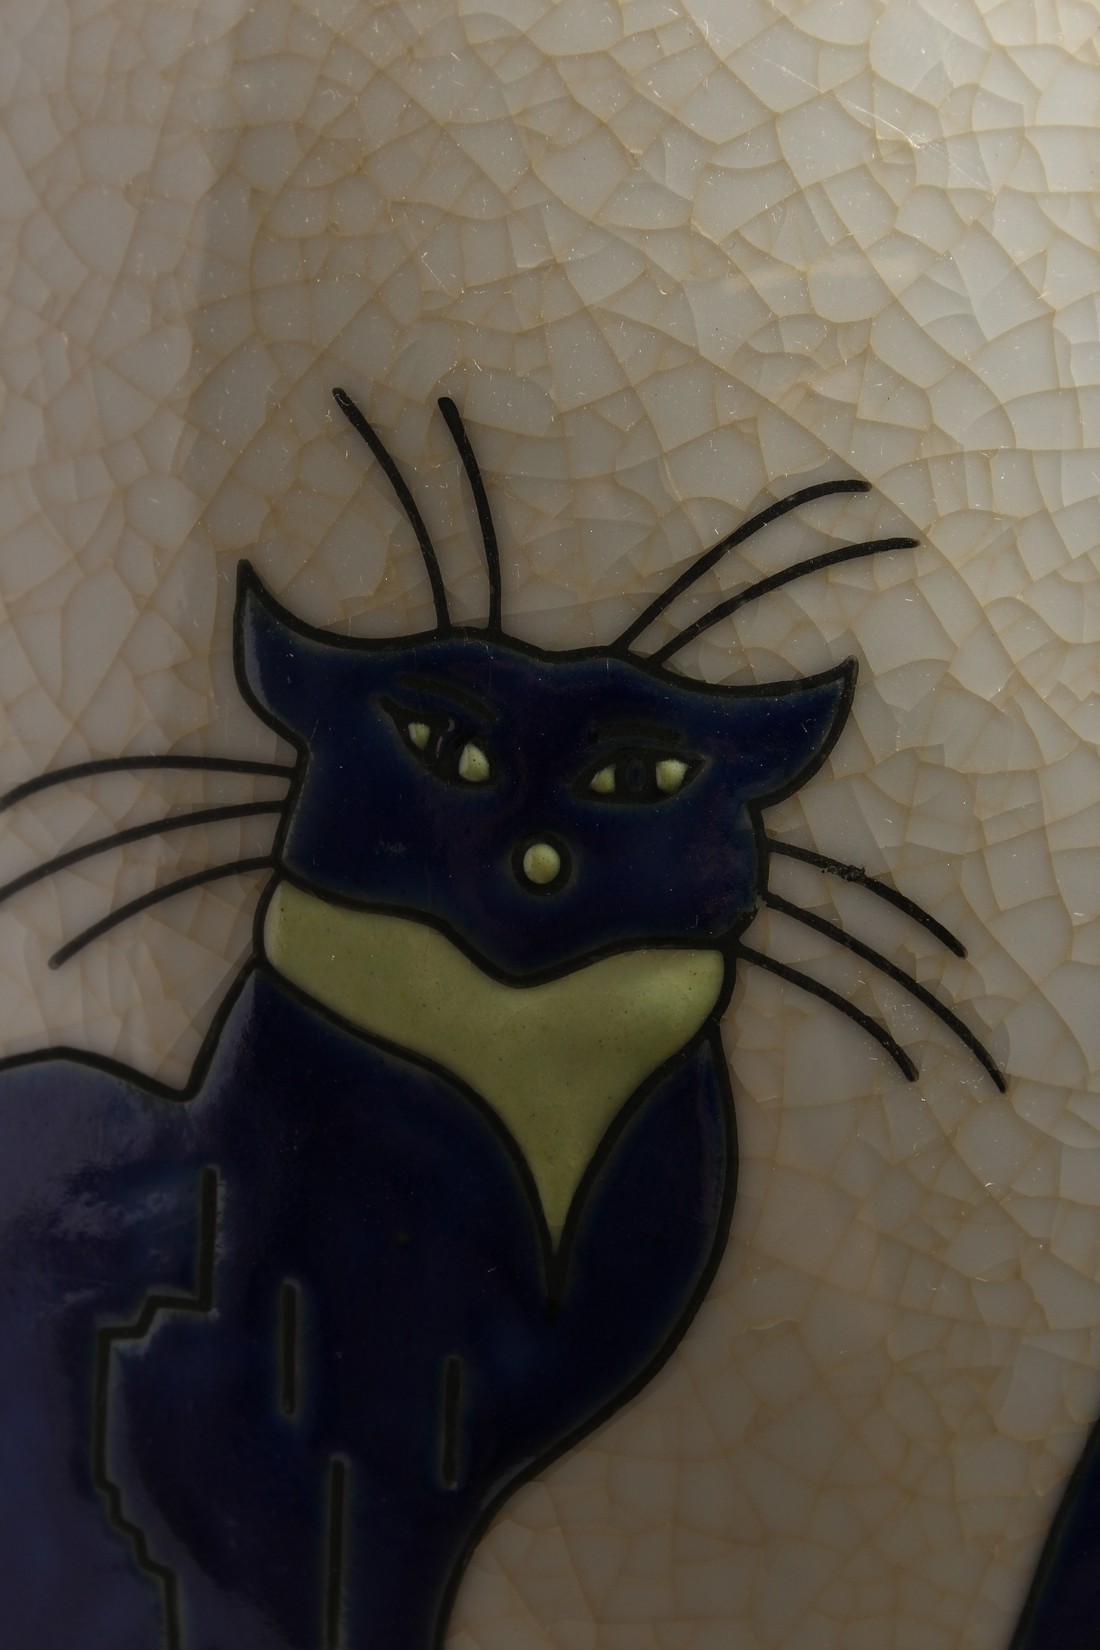 AN ART DECO DESIGN VASE with blue cats. - Image 3 of 5